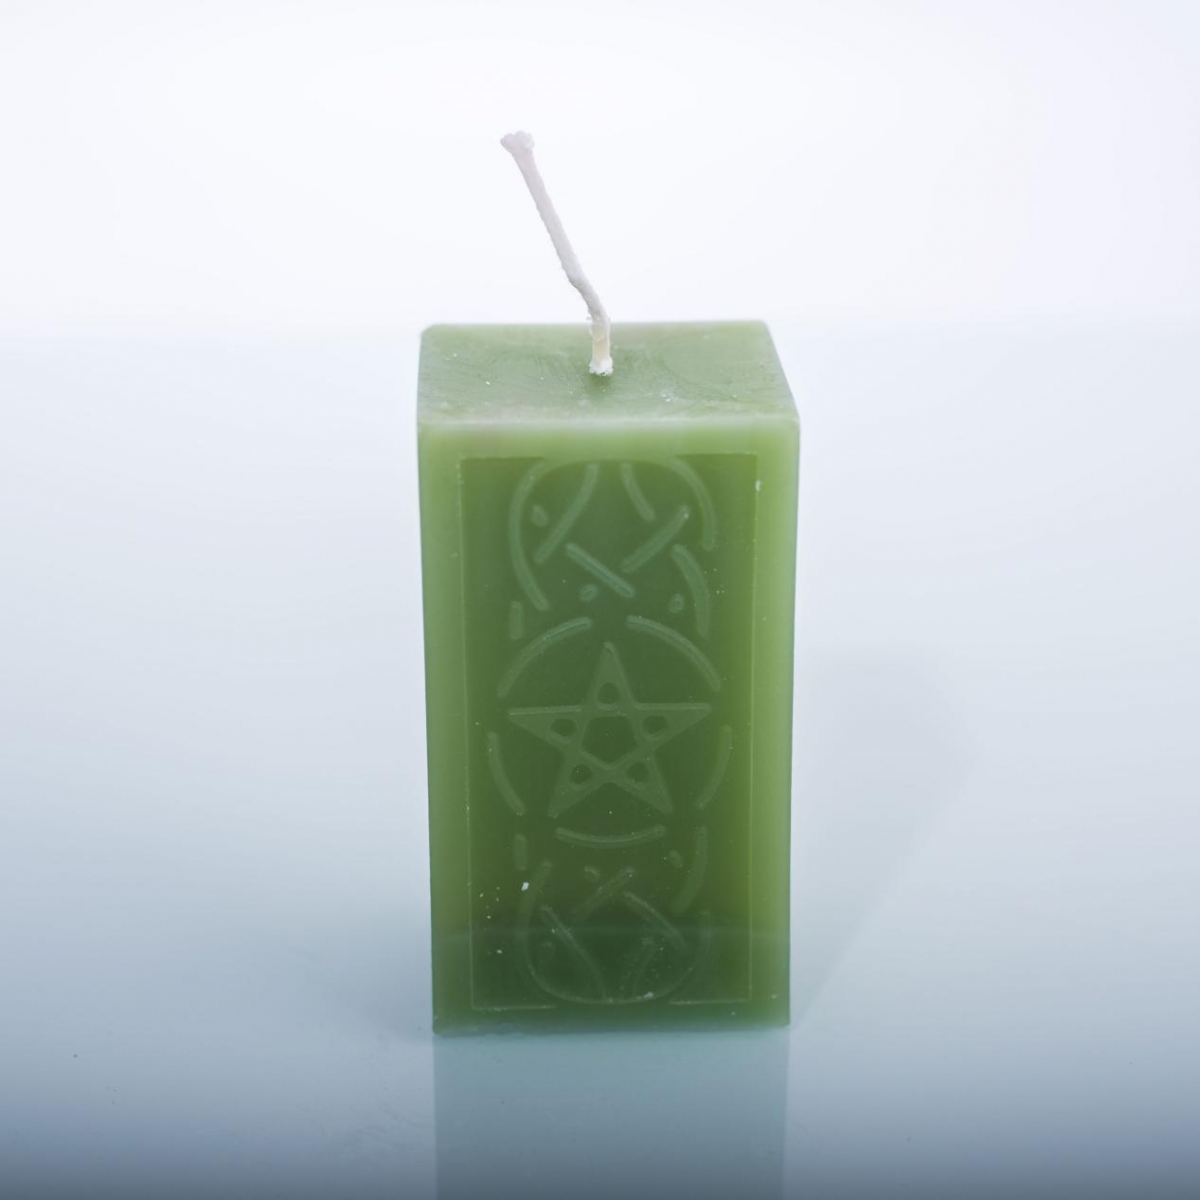 Witchcraft Candles :Green Color ,Cube Shape ,Carved Pentagram Symbol ,China Factory ,Wholesale Price-HOWCANDLE-Candles,Scented Candles,Aromatherapy Candles,Soy Candles,Vegan Candles,Jar Candles,Pillar Candles,Candle Gift Sets,Essential Oils,Reed Diffuser,Candle Holder,